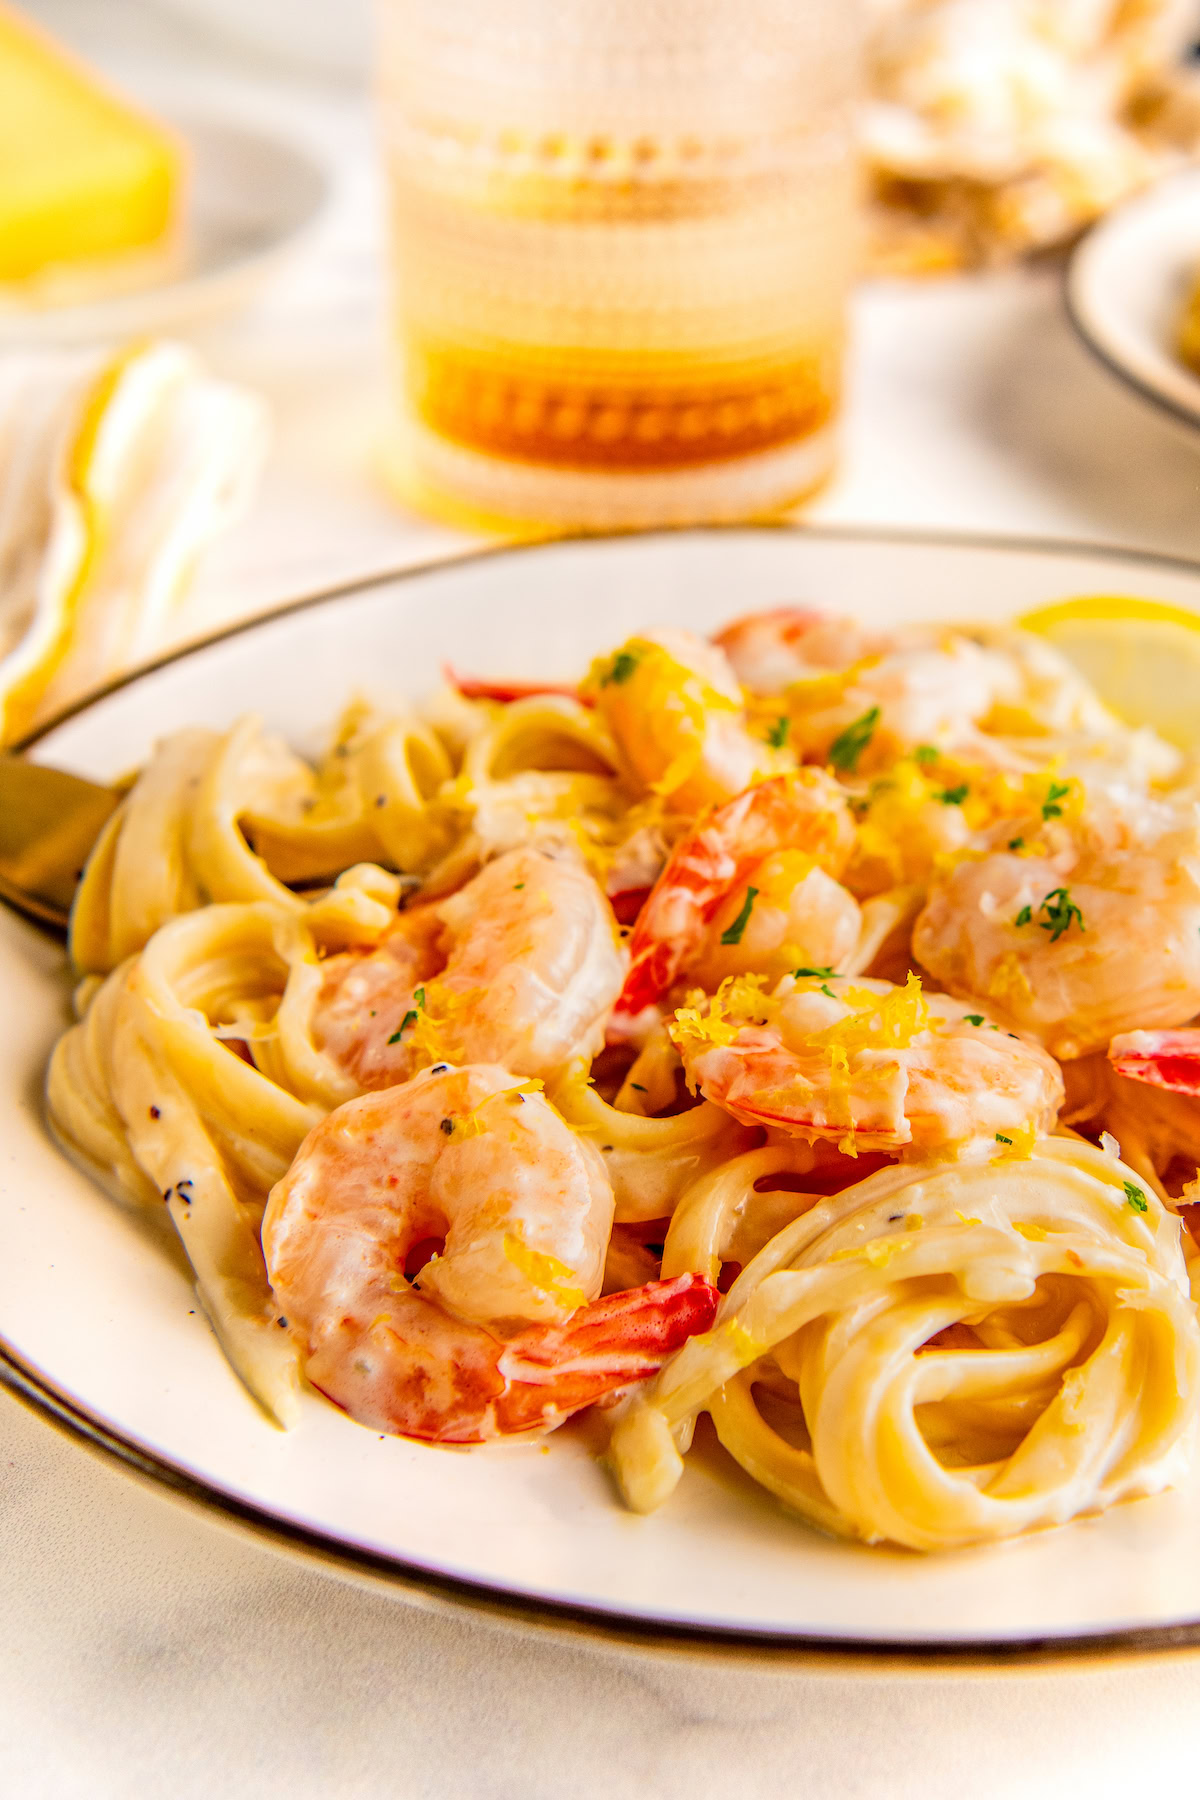 Lemon garlic shrimp pasta tossed in a parmesan cream sauce served on a plate topped with fresh lemon zest and parsley.